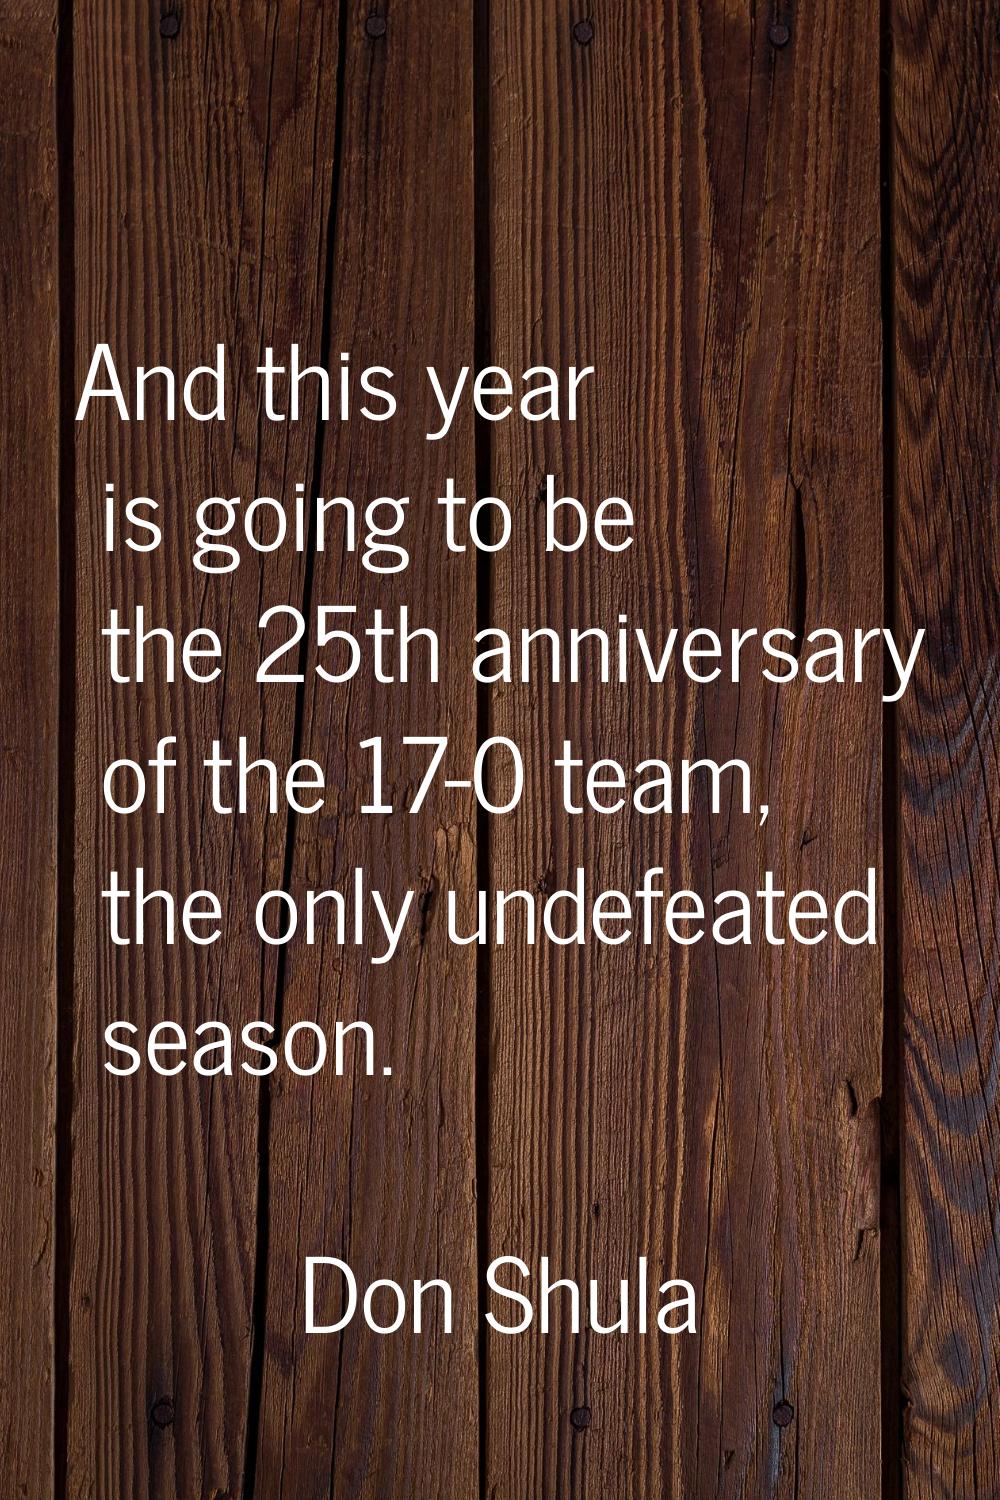 And this year is going to be the 25th anniversary of the 17-0 team, the only undefeated season.